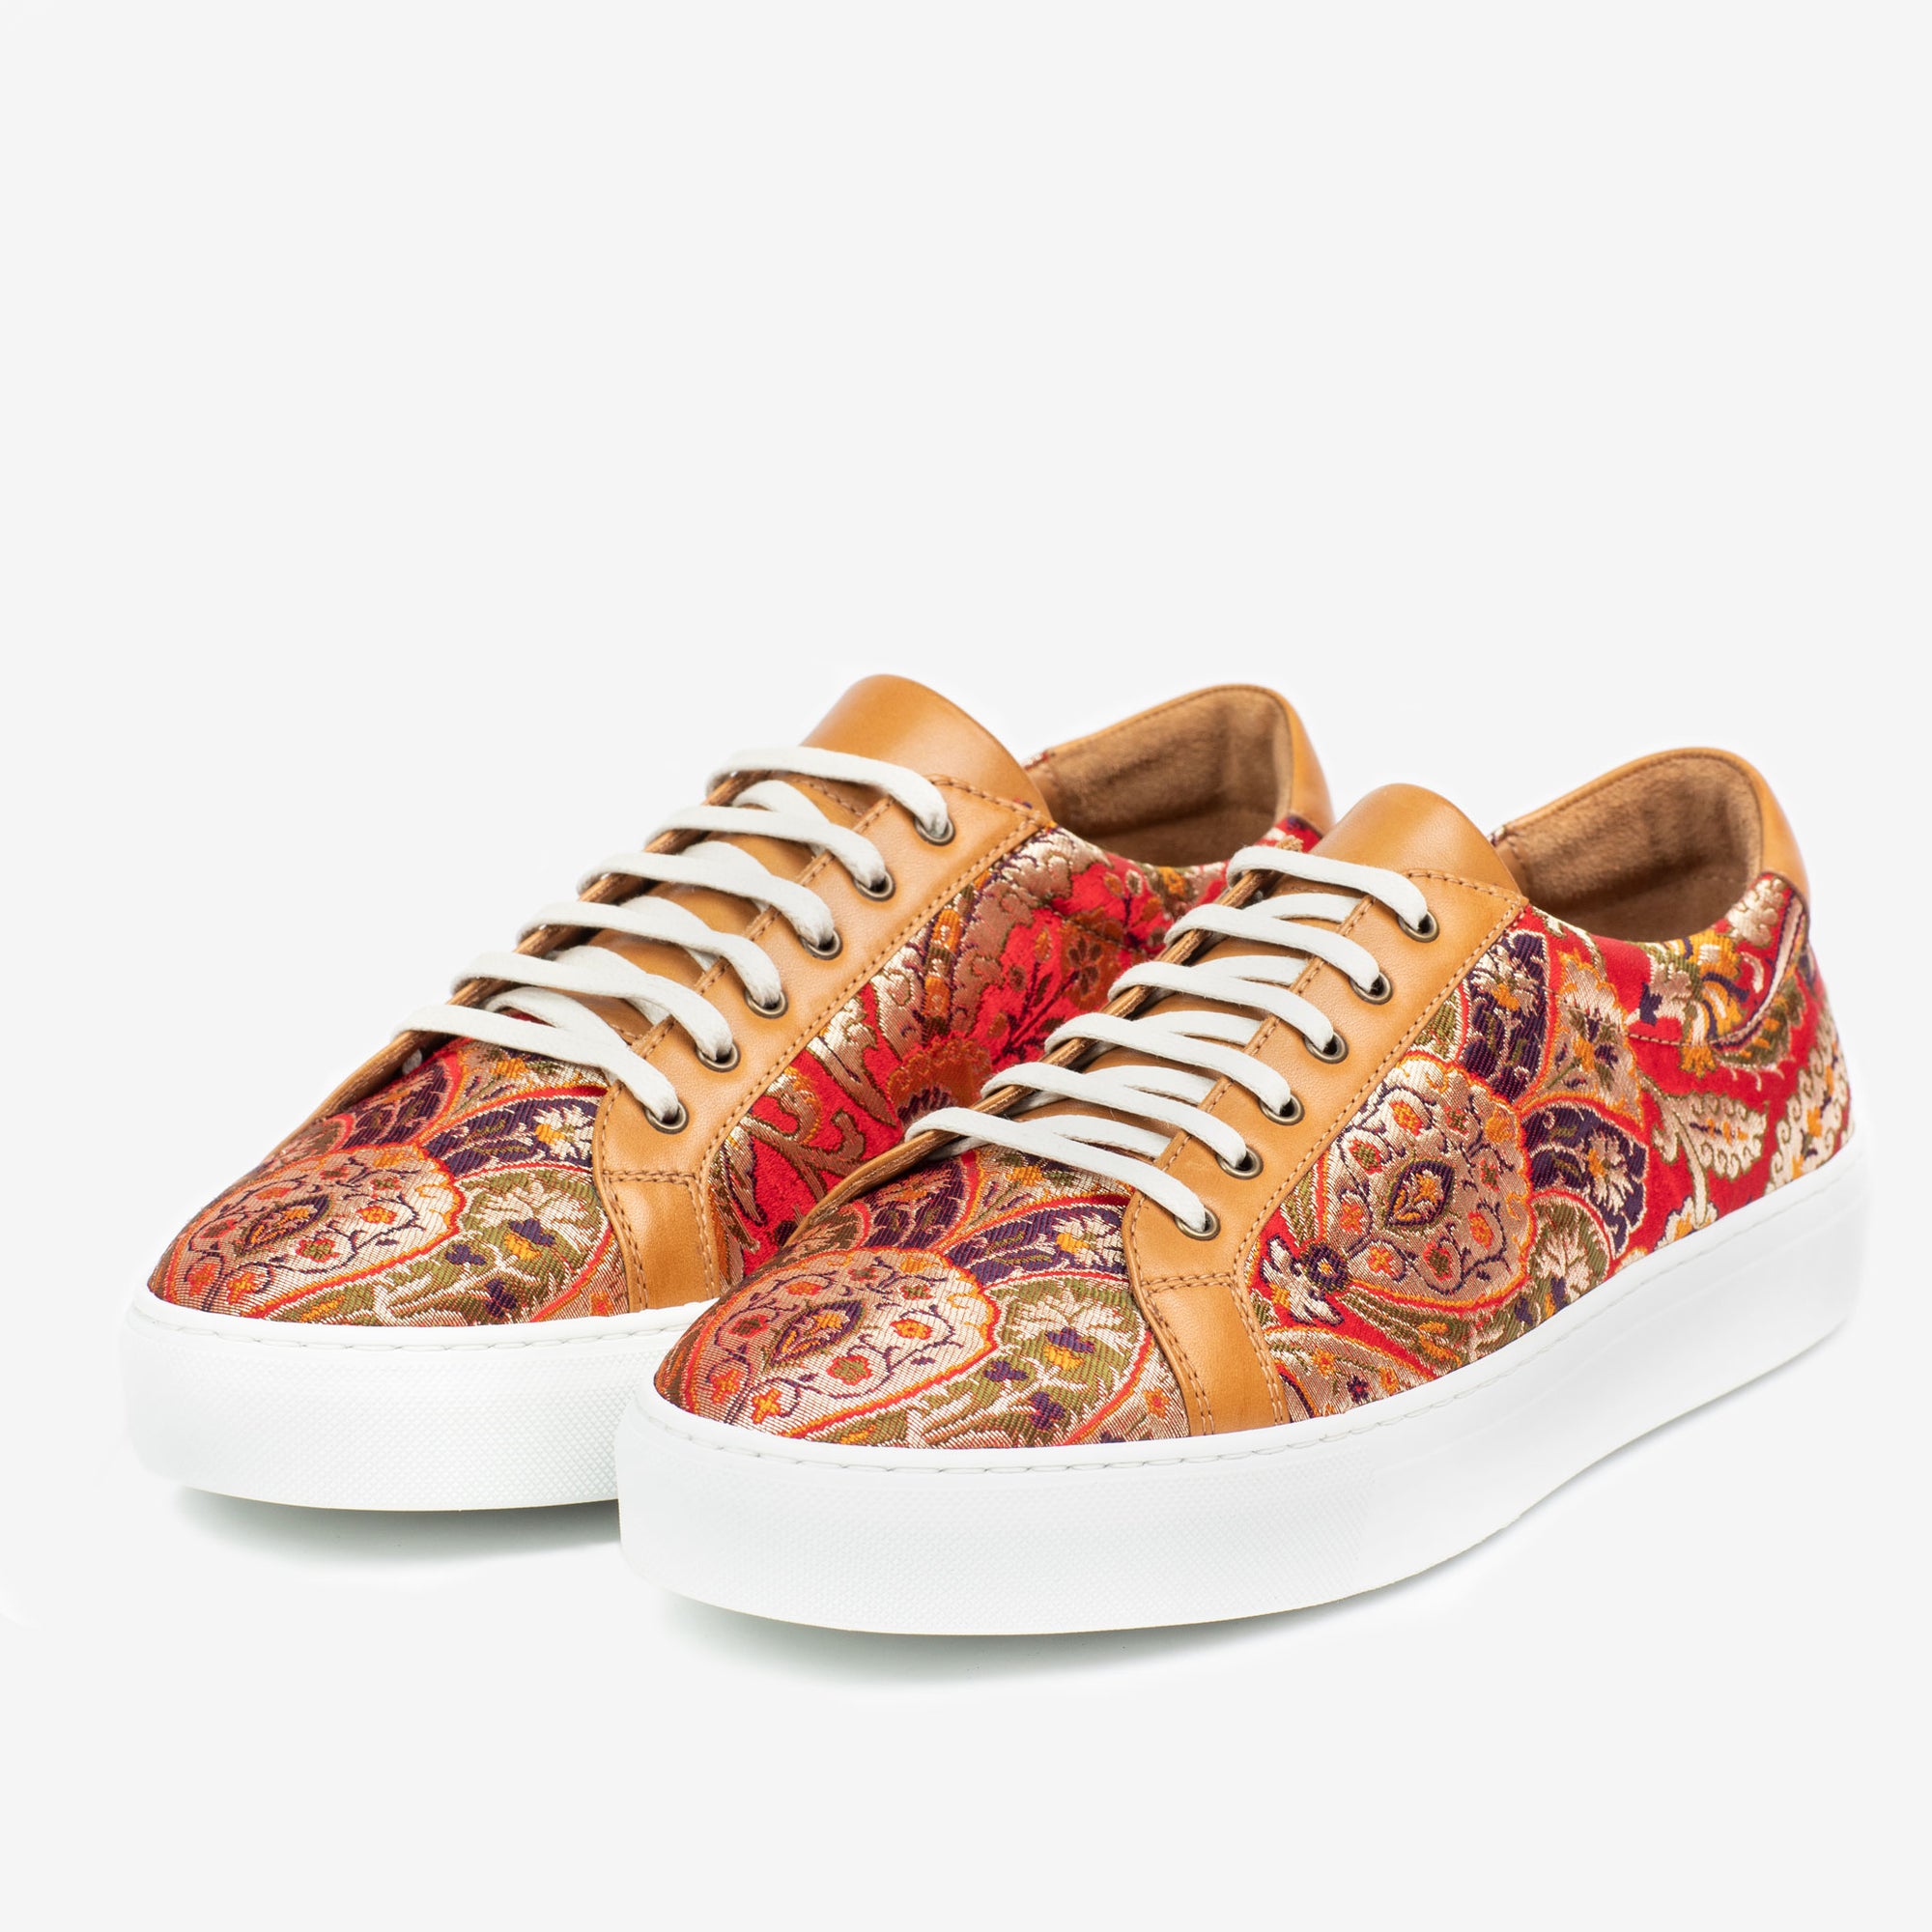 The Sneaker in Red Paisley - Unique Sneakers